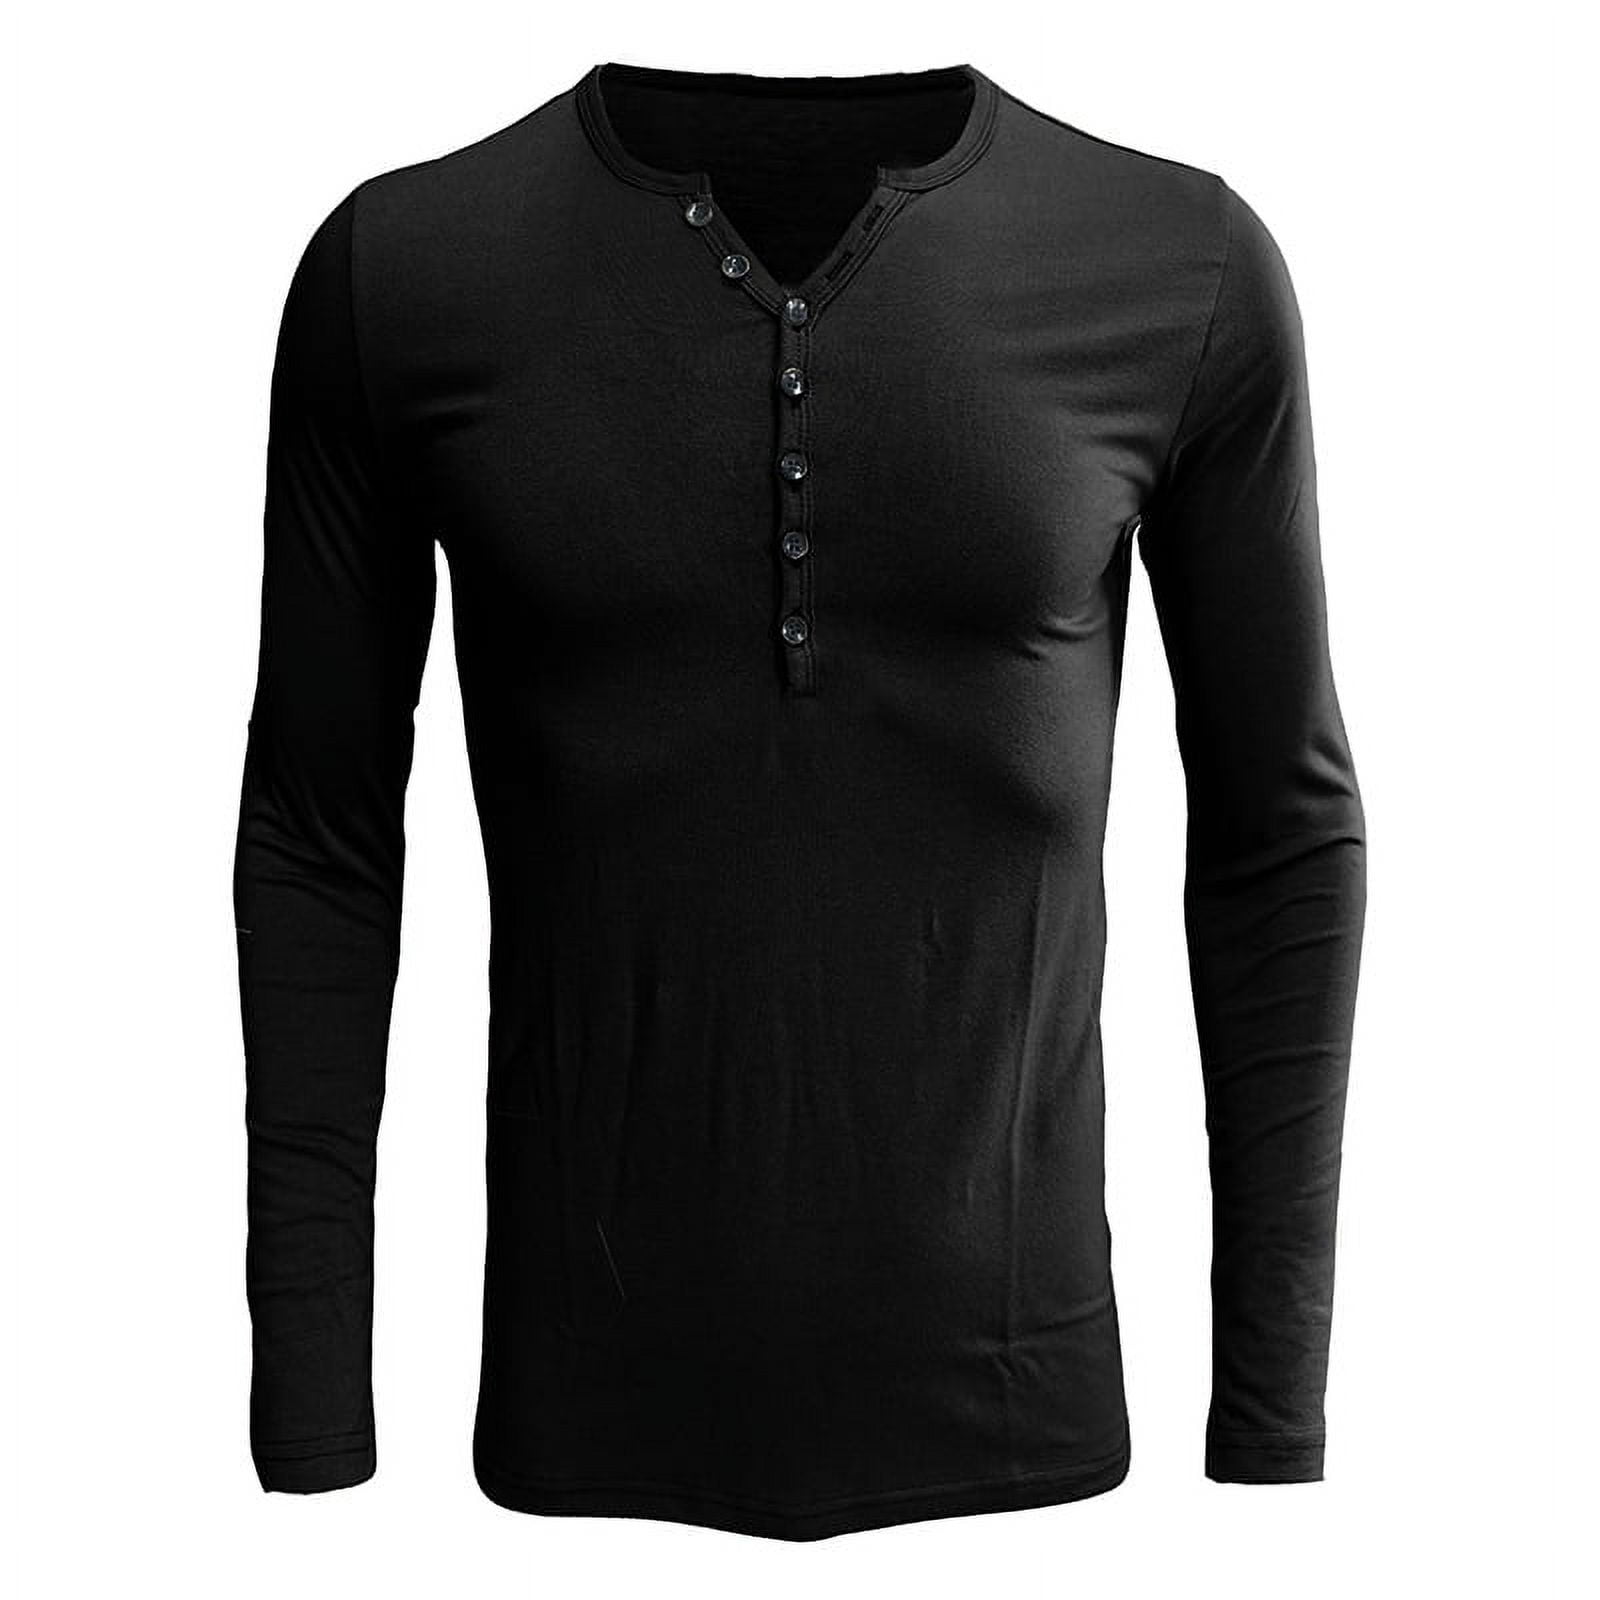 Autumn and winter clothing men's shirts long-sleeved men's bottoming ...